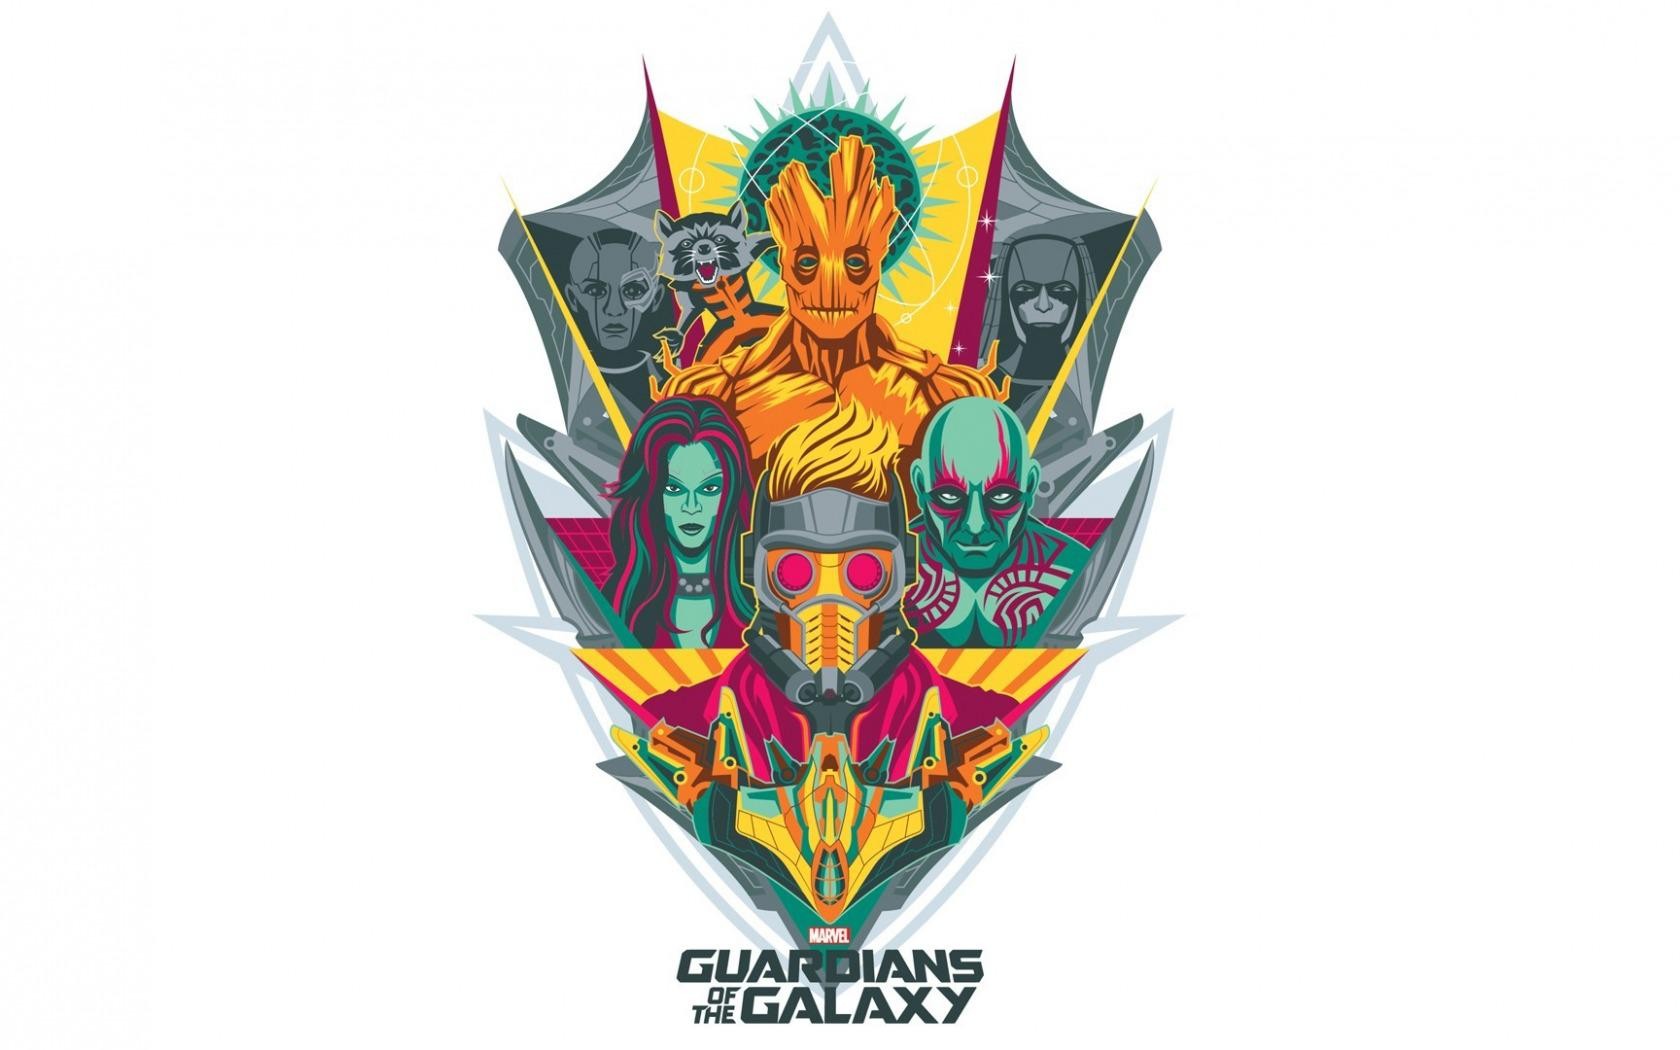 General 1680x1050 Guardians of the Galaxy Star-Lord Gamora  Rocket Raccoon Groot Drax the Destroyer simple background artwork movies Marvel Cinematic Universe white background superhero Marvel Comics